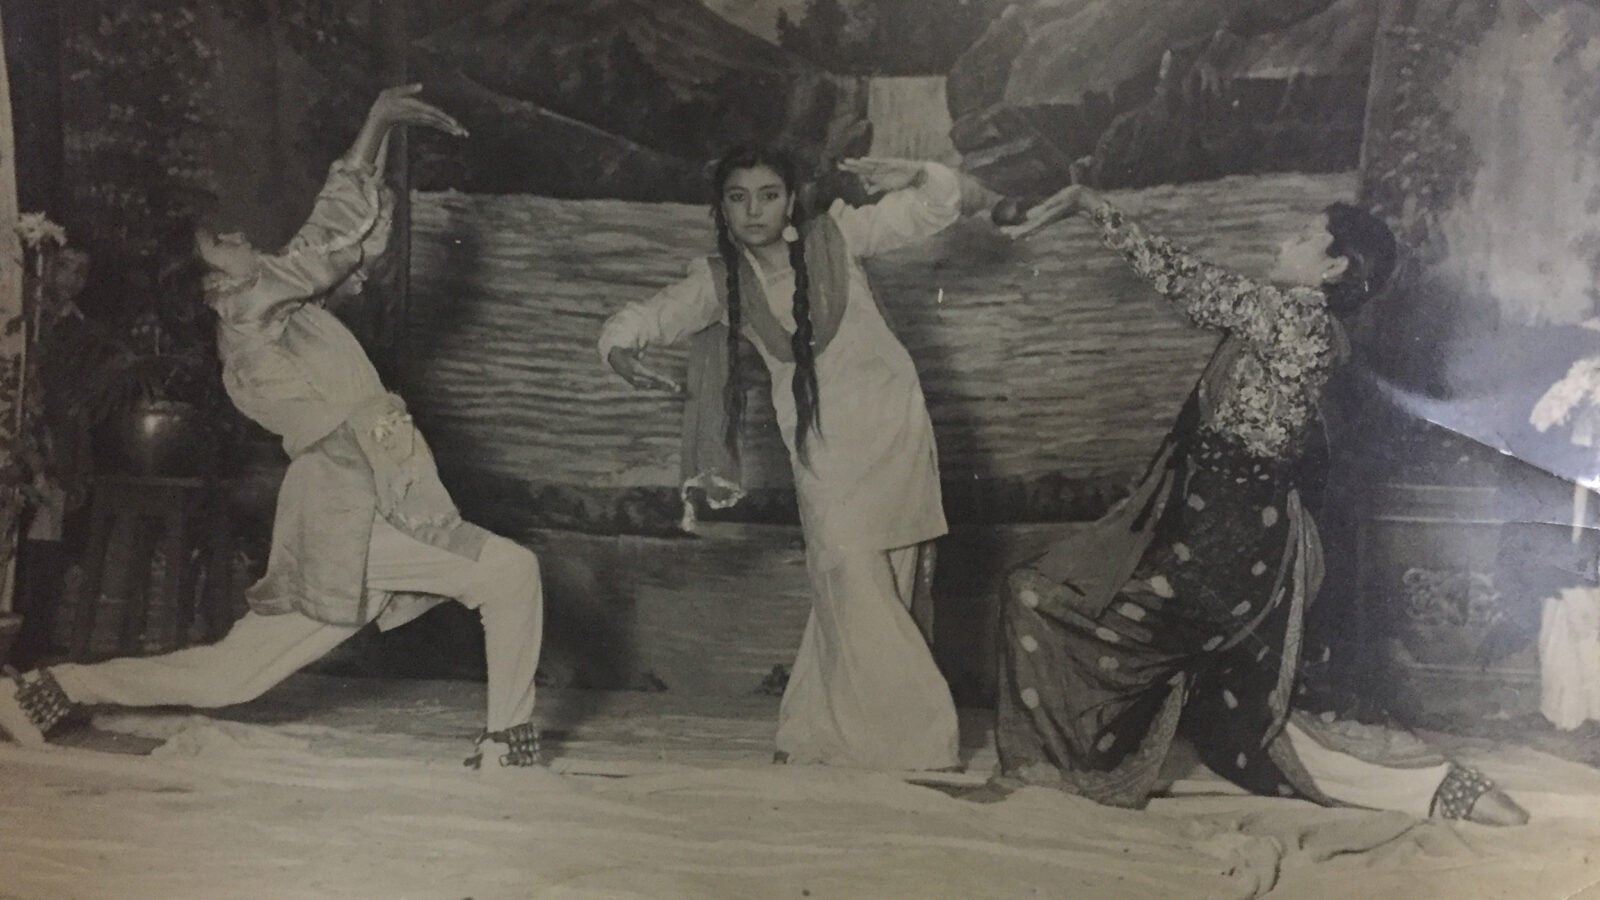 Harvard’s Lakshmi Mittal South Asia Institute is examining the ramifications of the violent Partition of British India in 1947. One of SAI's interviewees, Vimla Dhingra (center), offered this photo of her performing in a play before the Partition. 